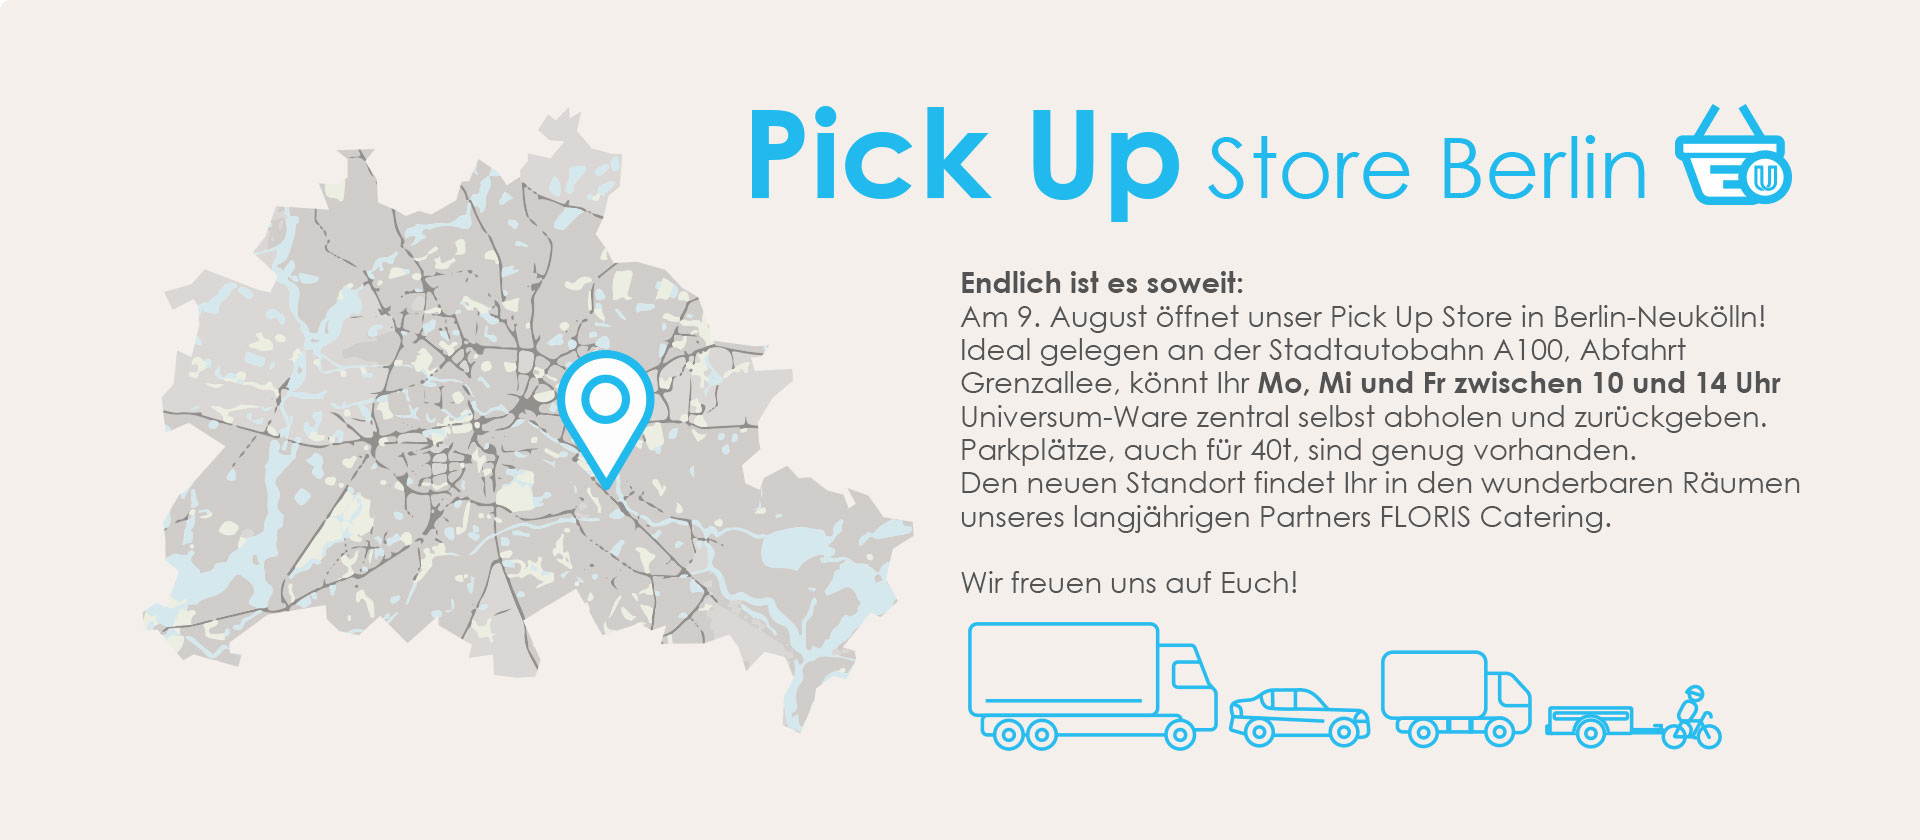 Pick-Up Store